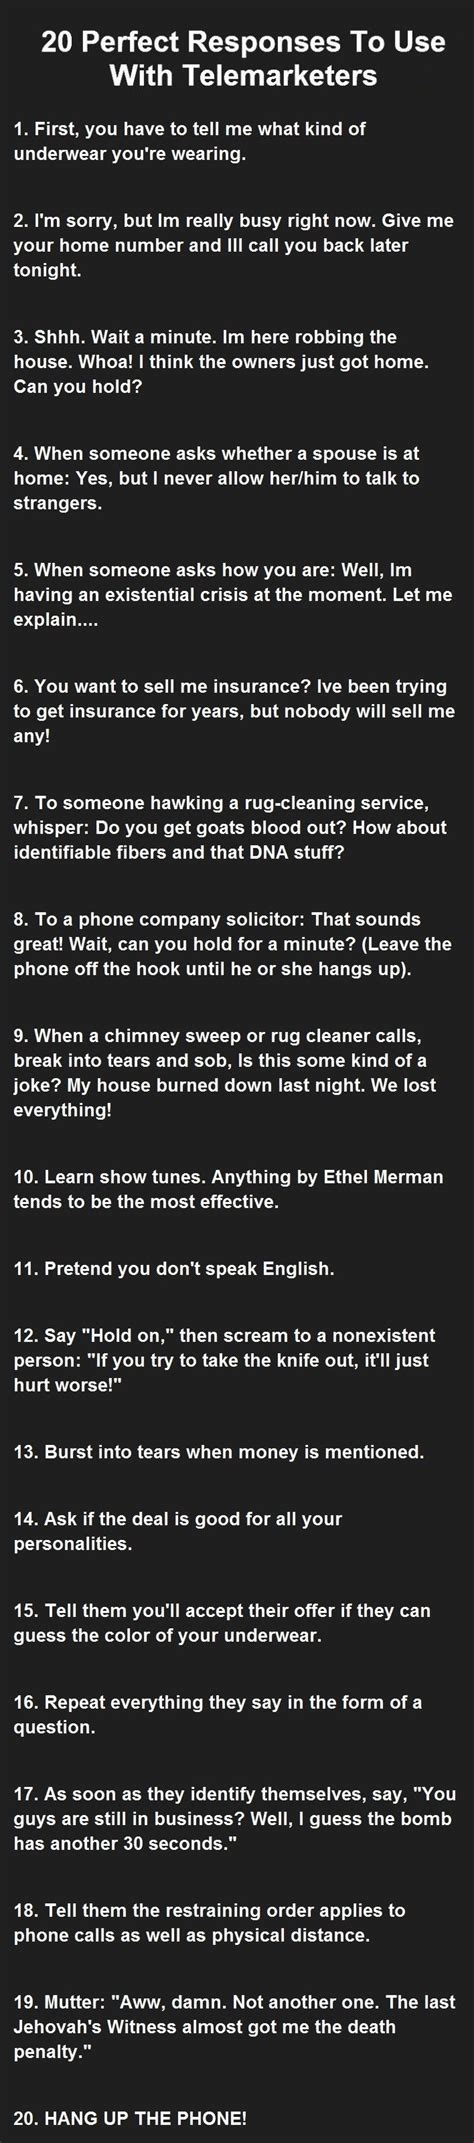 20 perfect responses to use with telemarketers funny jokes story lol funny quote funny quotes